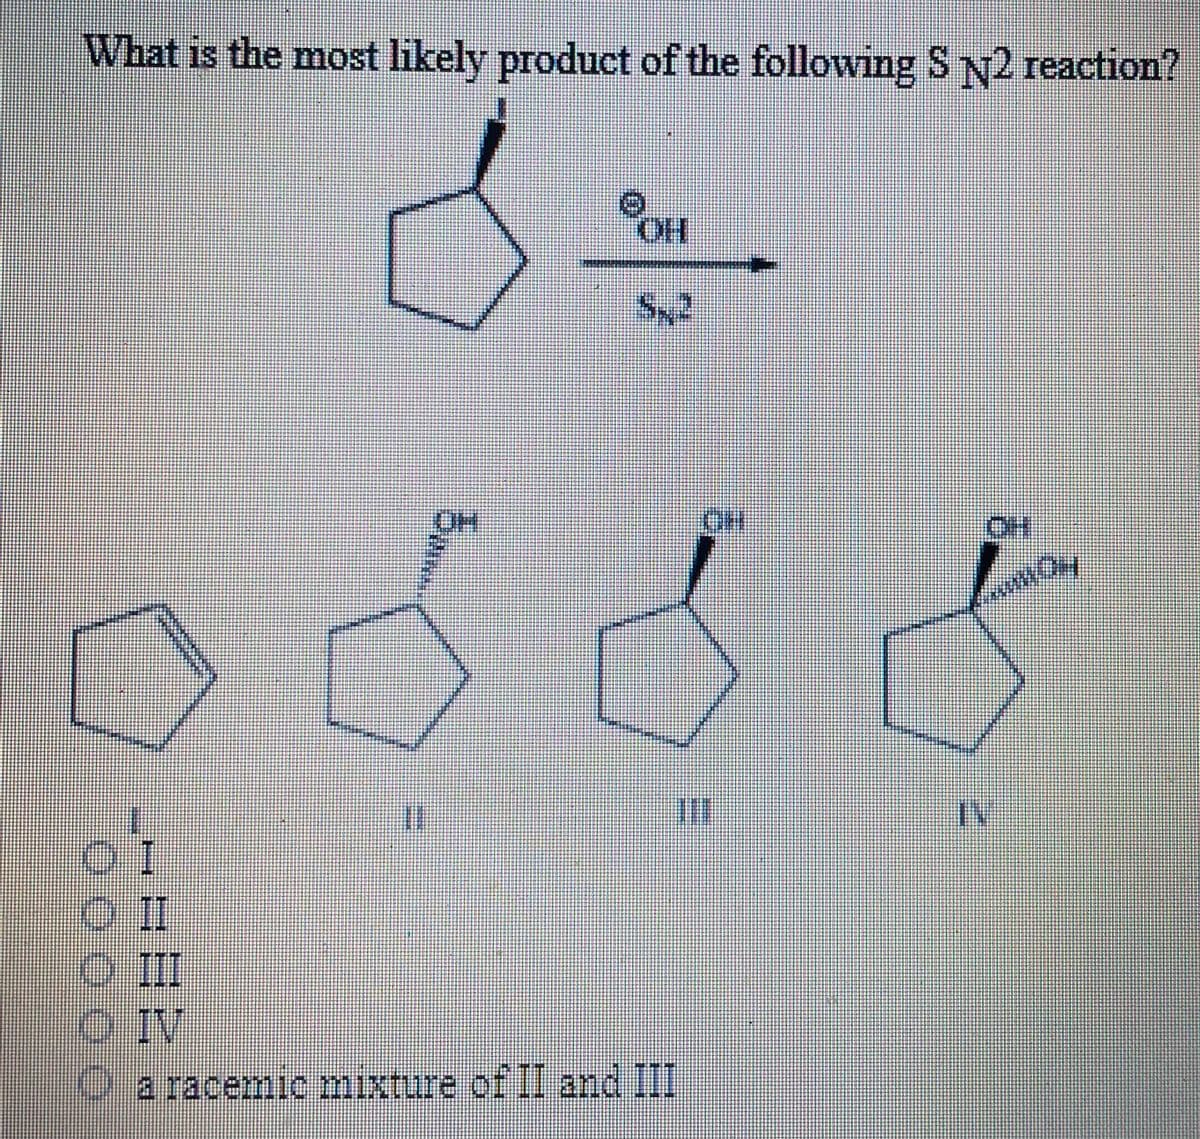 What is the most likely product of the following SN2 reaction?
HO.
%3D
O II
O IV
Oa racemic mixture of II and III
